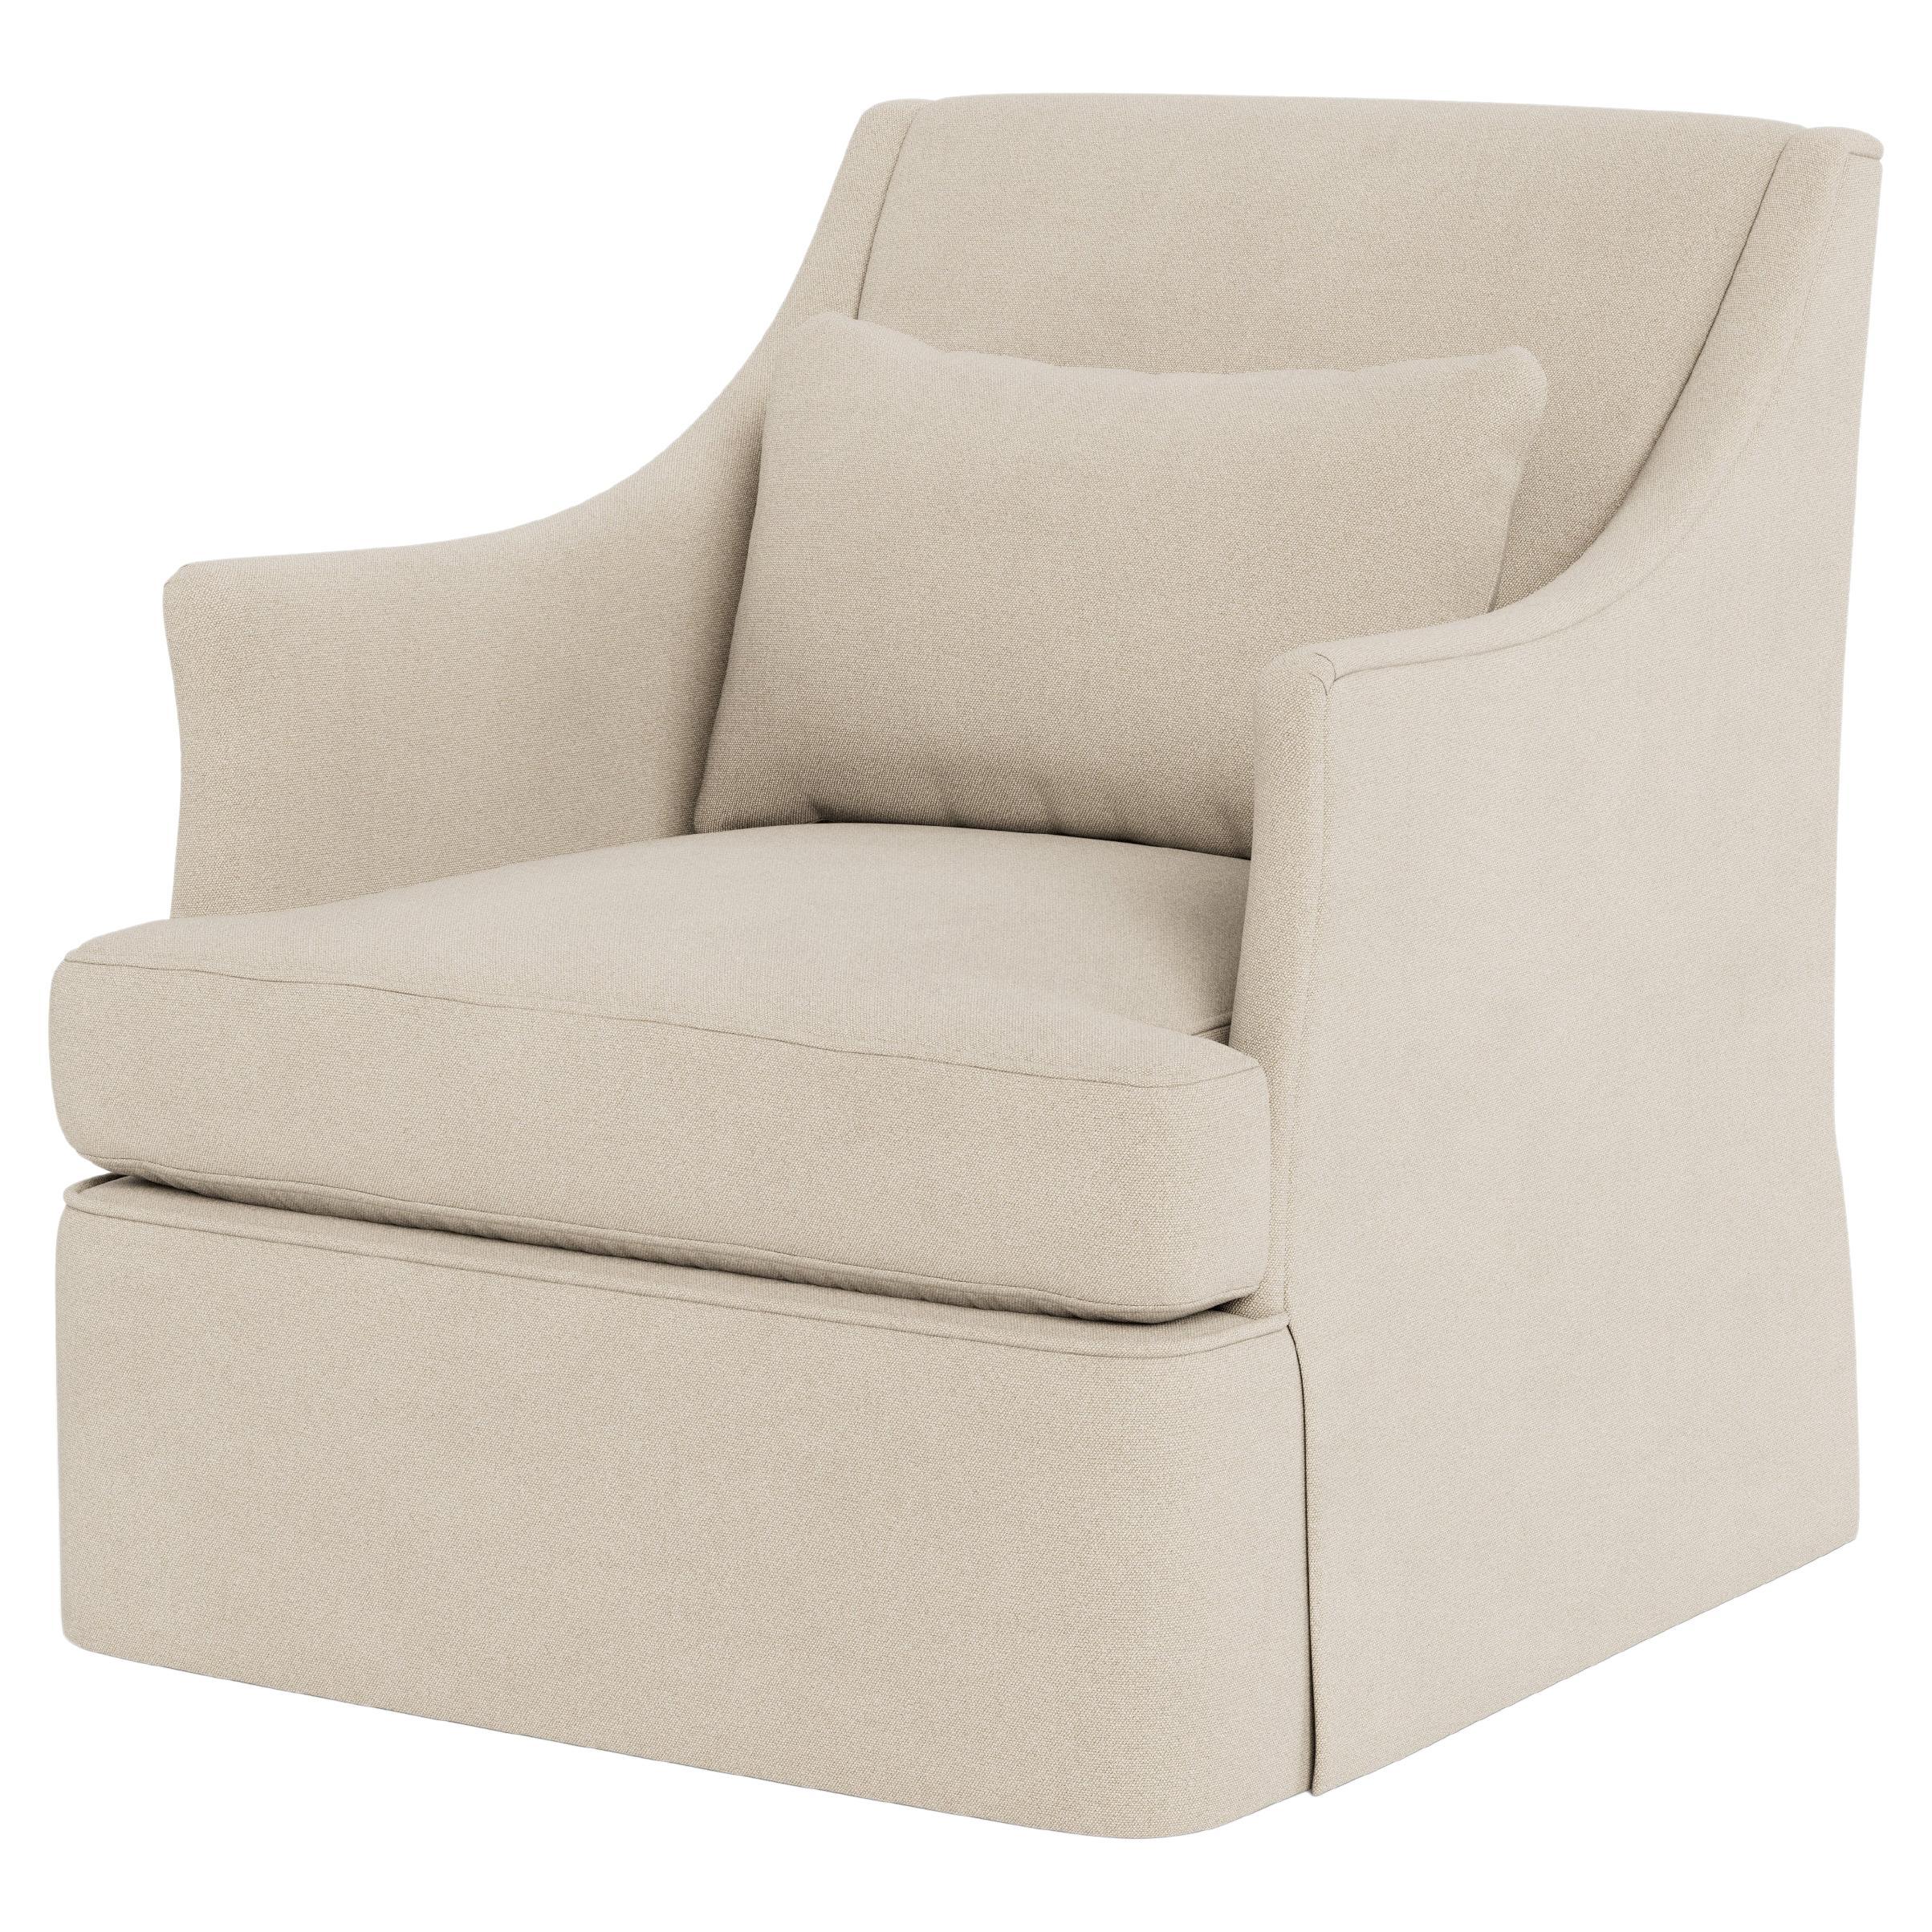 Bunny Williams Home Bowen Armchair, Solid Linen/Oatmeal For Sale